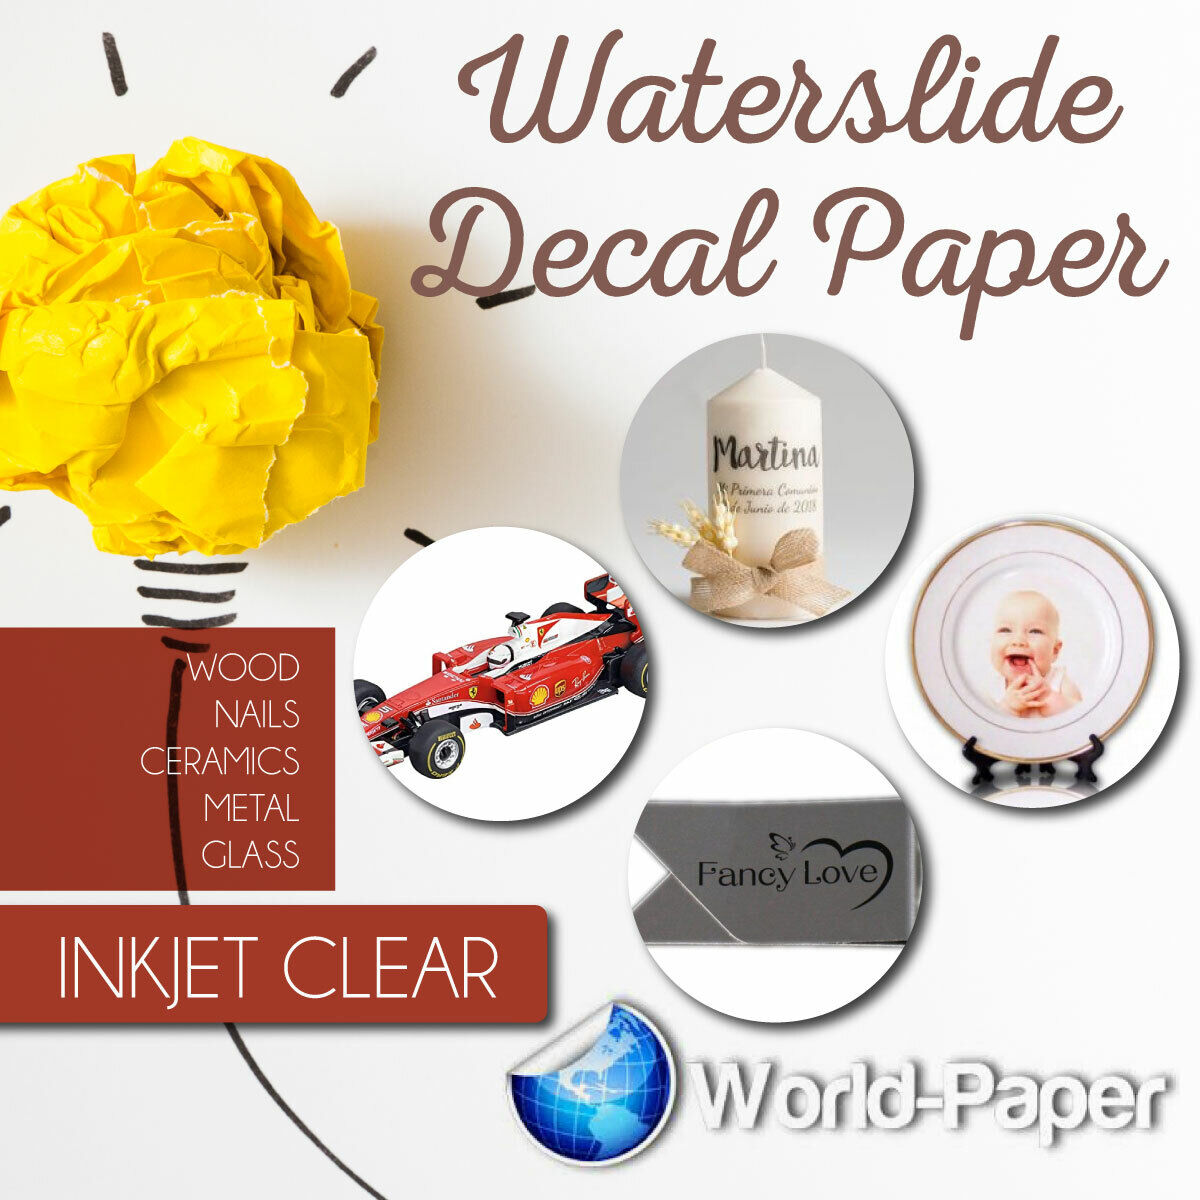 INKJET CLEAR Waterslide Decal Paper 8.5 x 11, 5 sheets MADE IN USA NOT CHINA #1